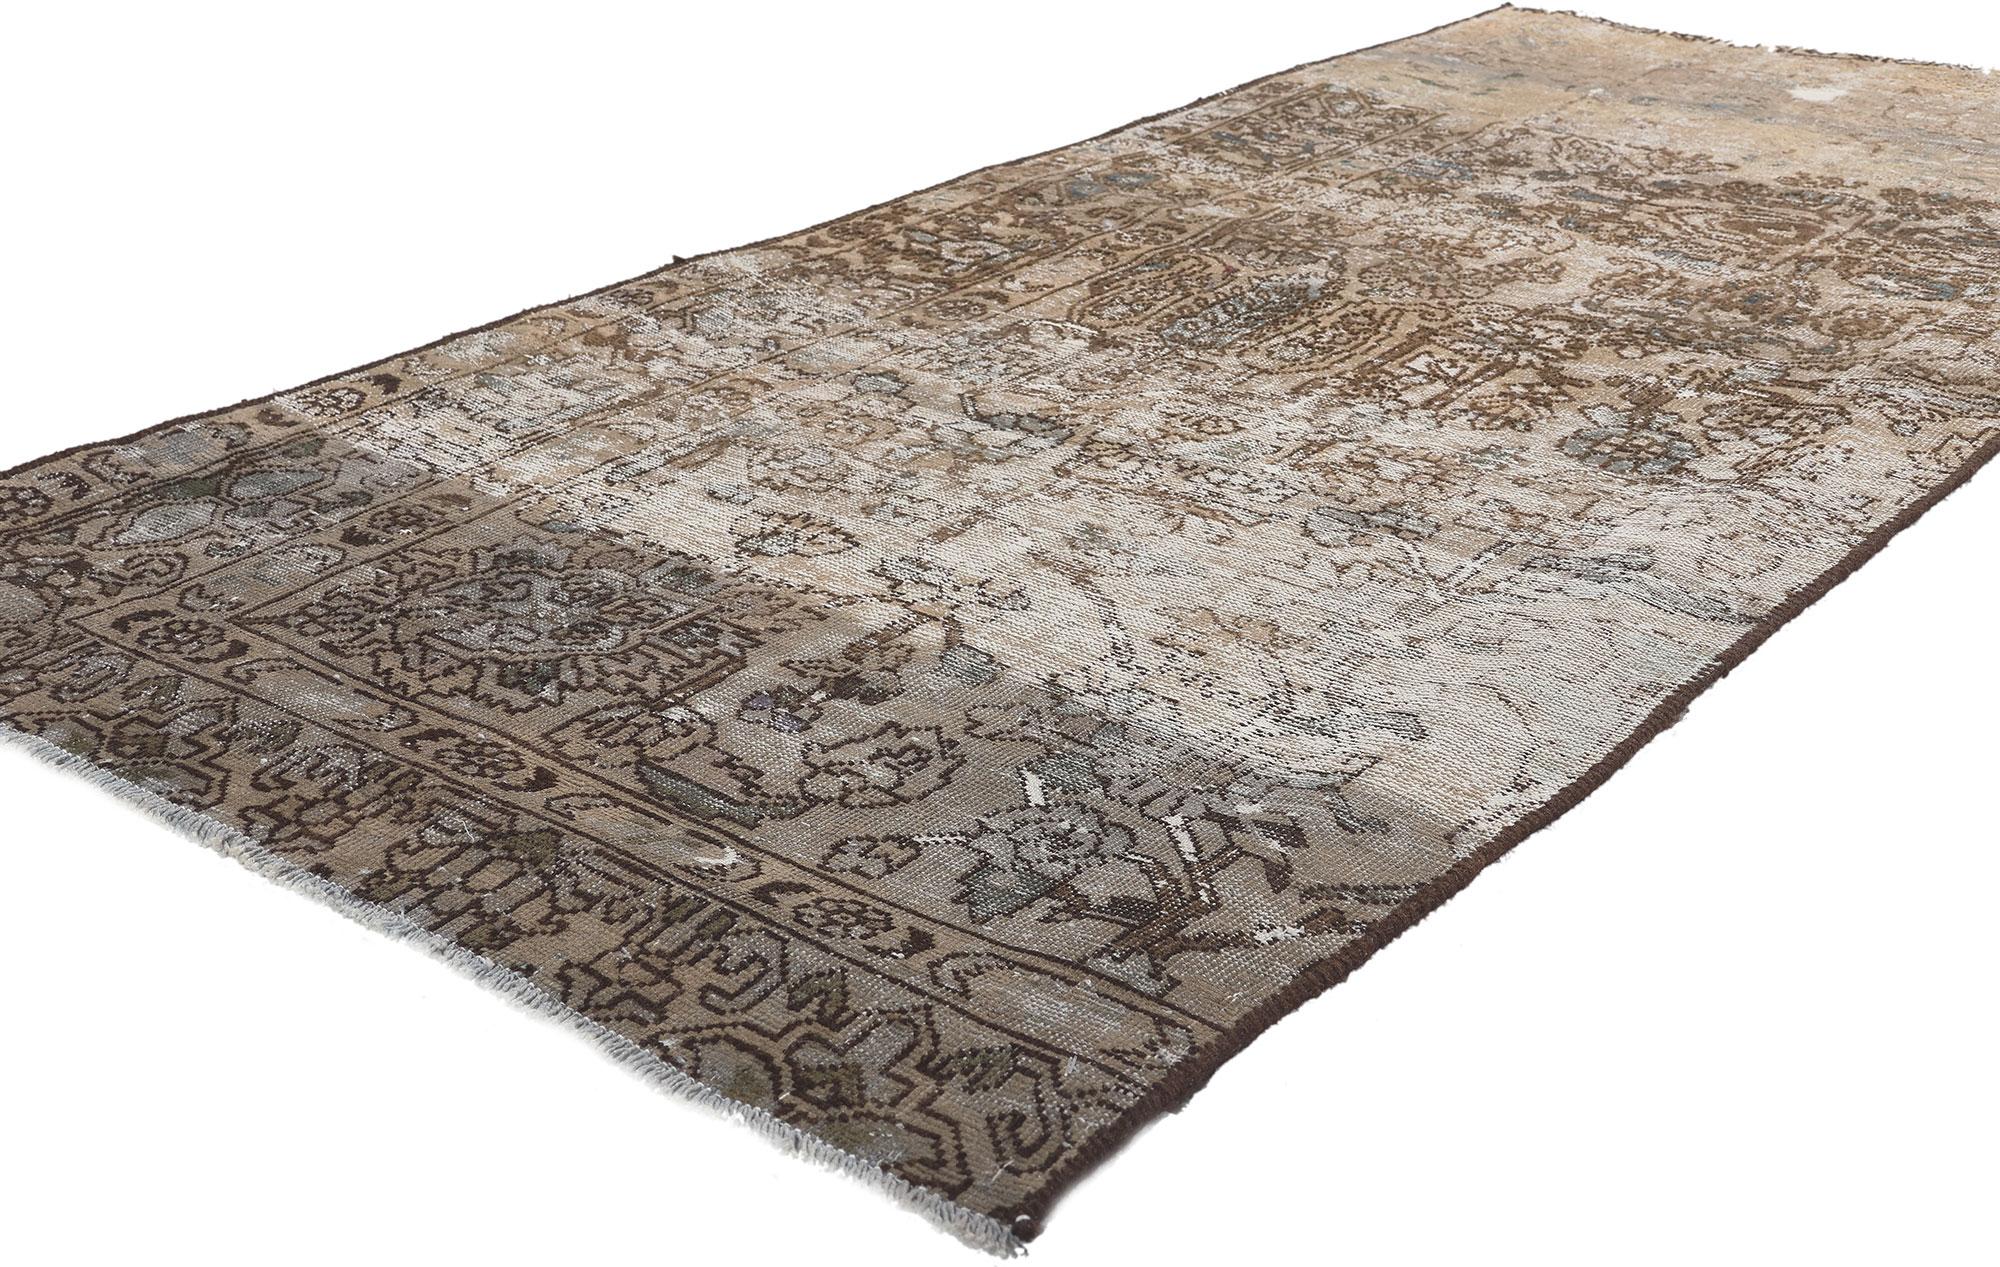 78602 Distressed Antique Persian Bakhtiari Rug, 03'00 x 06'10. 
Weathered charm meets rustic sensibility in this distressed vintage Persian Bakhtiari rug. The faded floral pattern and neutral earth-tone colors woven into this piece work together